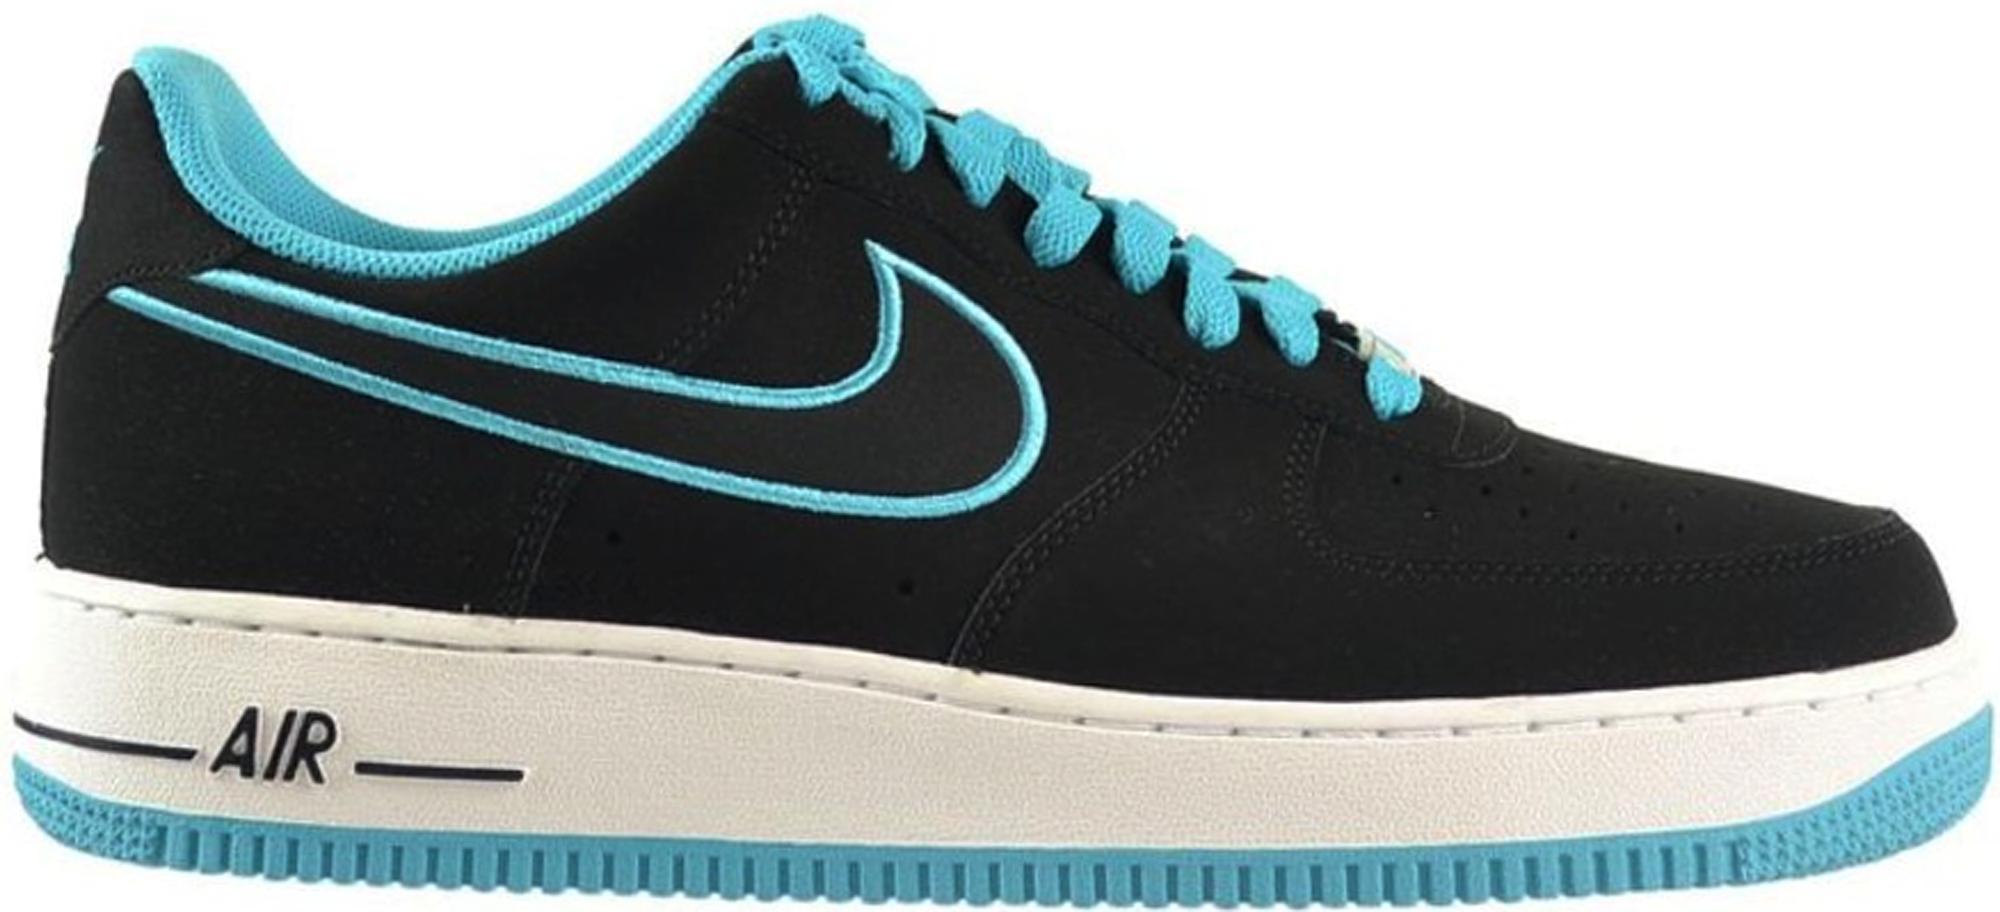 black and turquoise air force 1